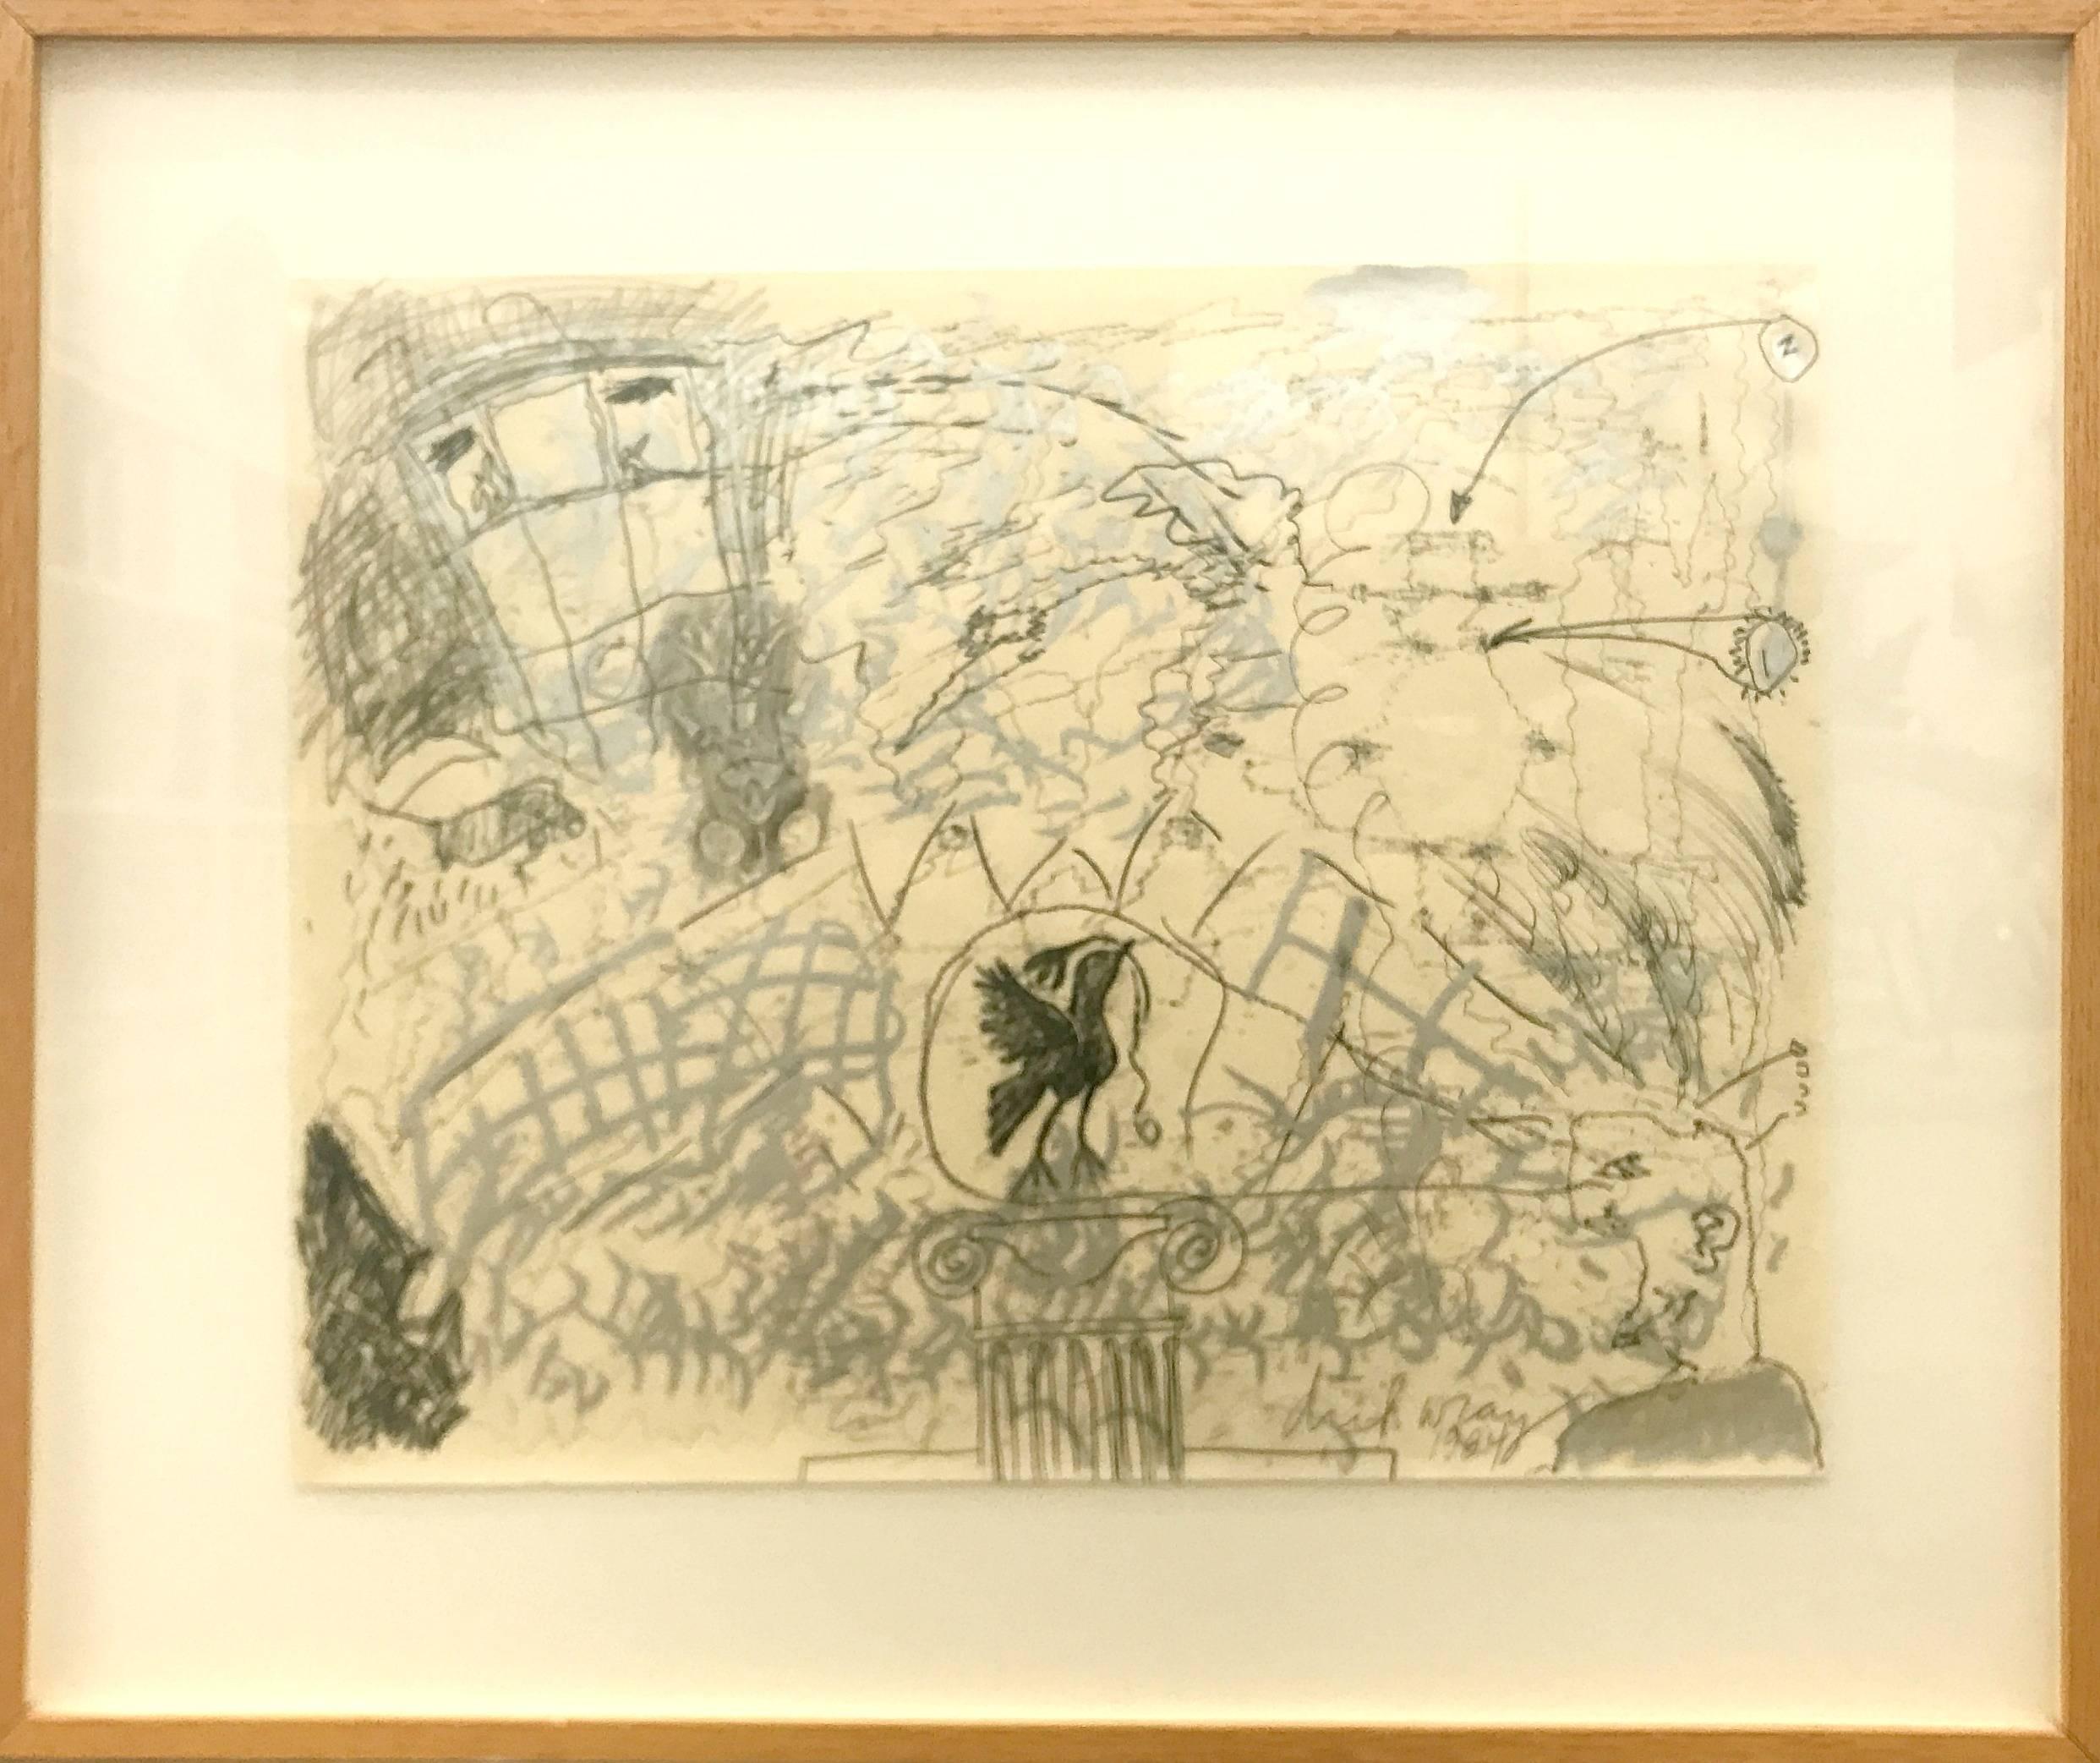 Silver paint and graphite mix and jump off the paper in Dick Wray's untitled abstract expressionist work framed in a warm wood and ready to hang. 

Richard "Dick" Wray (December 5, 1933 - January 9, 2011) was an American abstract expressionist